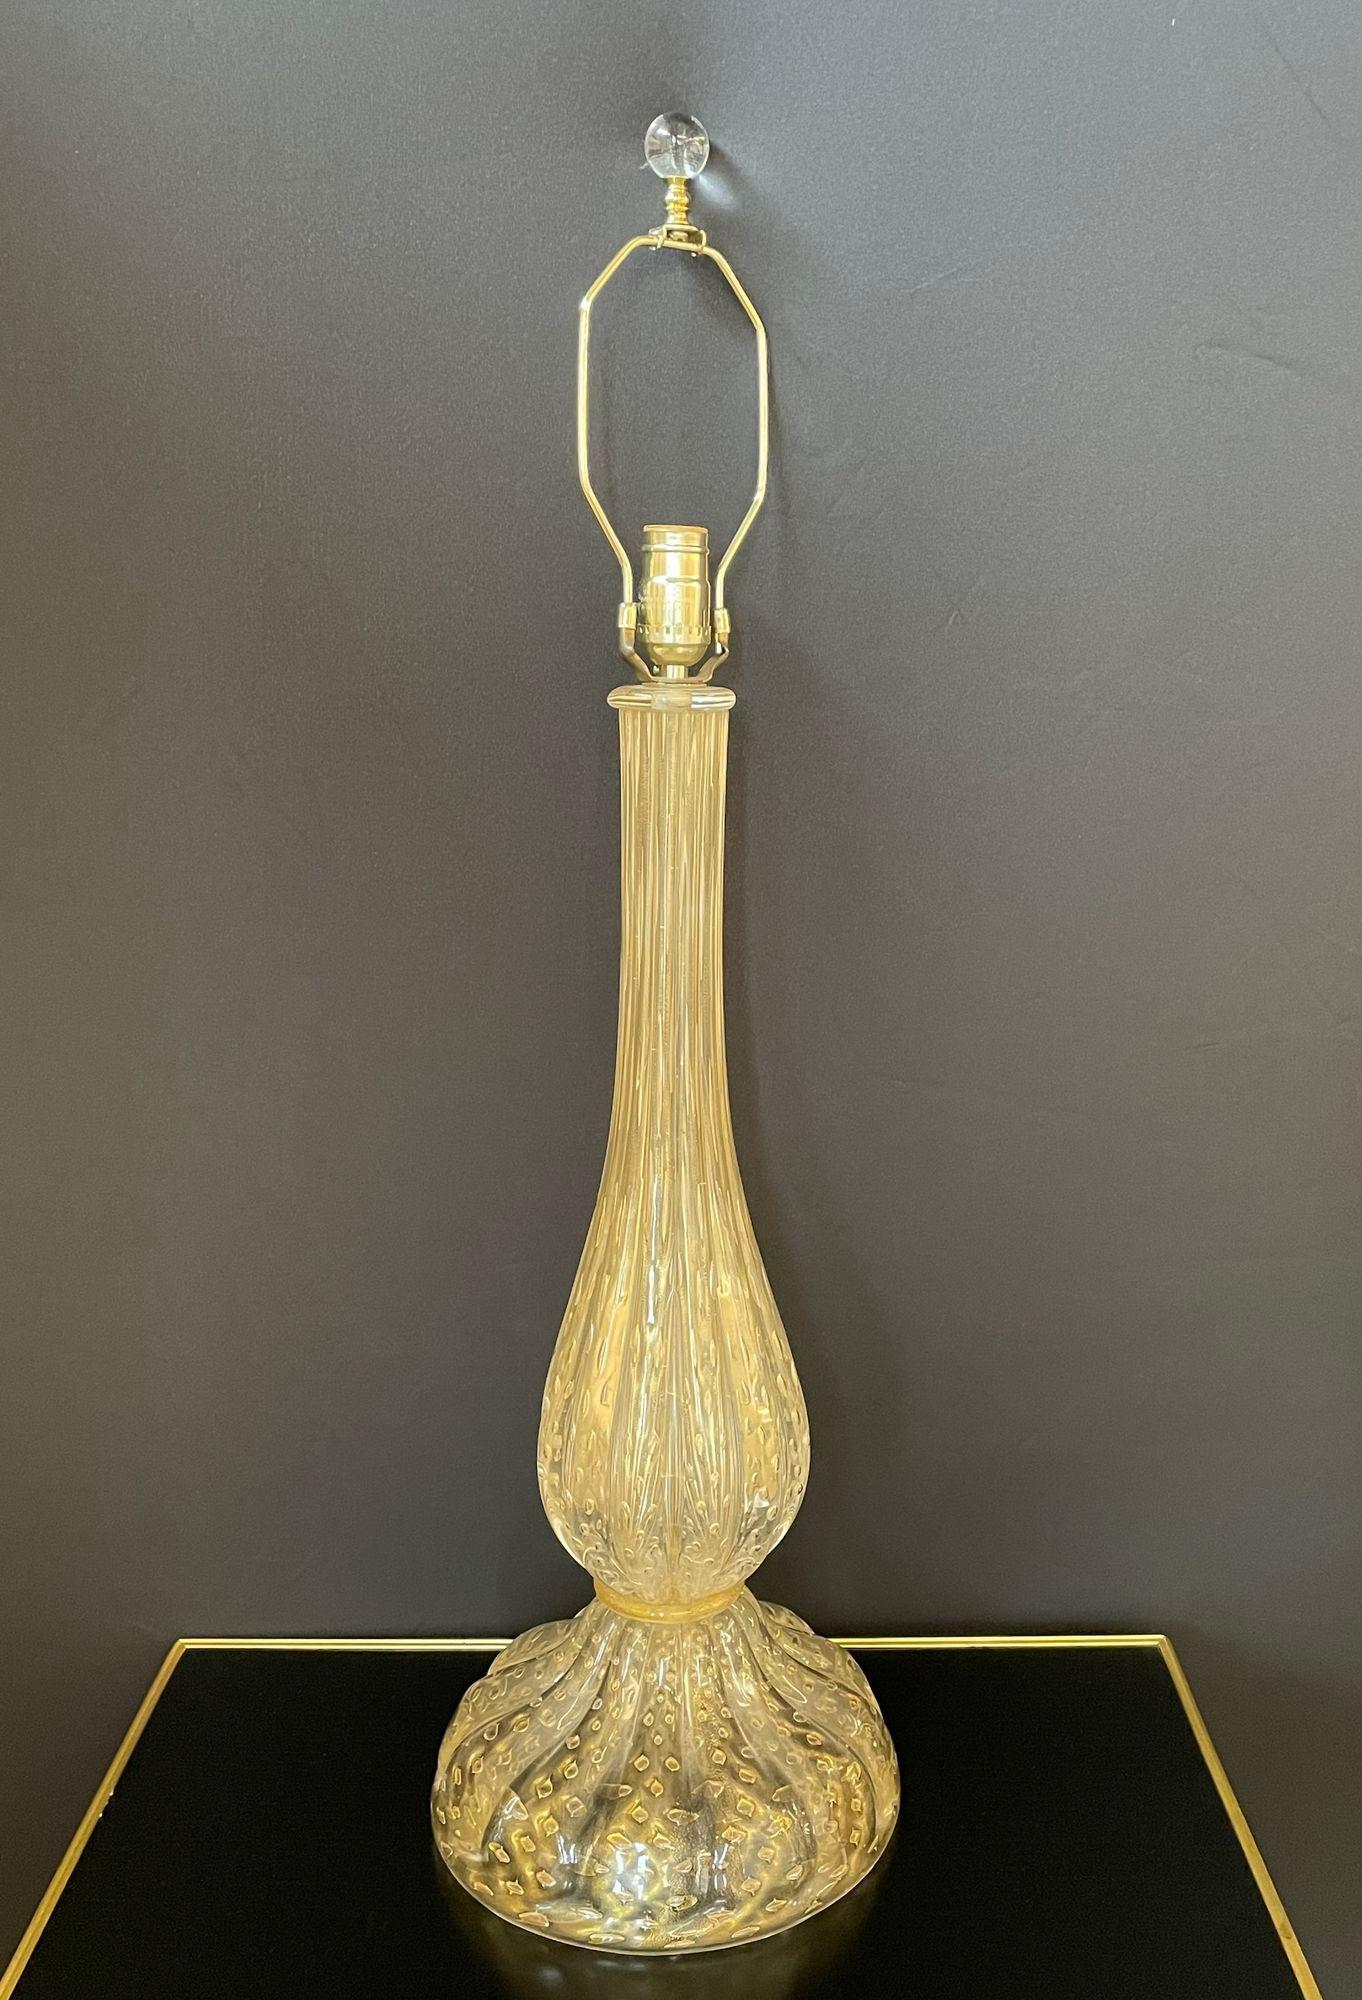 Large Italian Murano Glass Table Lamp, Mid-Century Modern, Barovier Toso Style In Good Condition For Sale In Stamford, CT